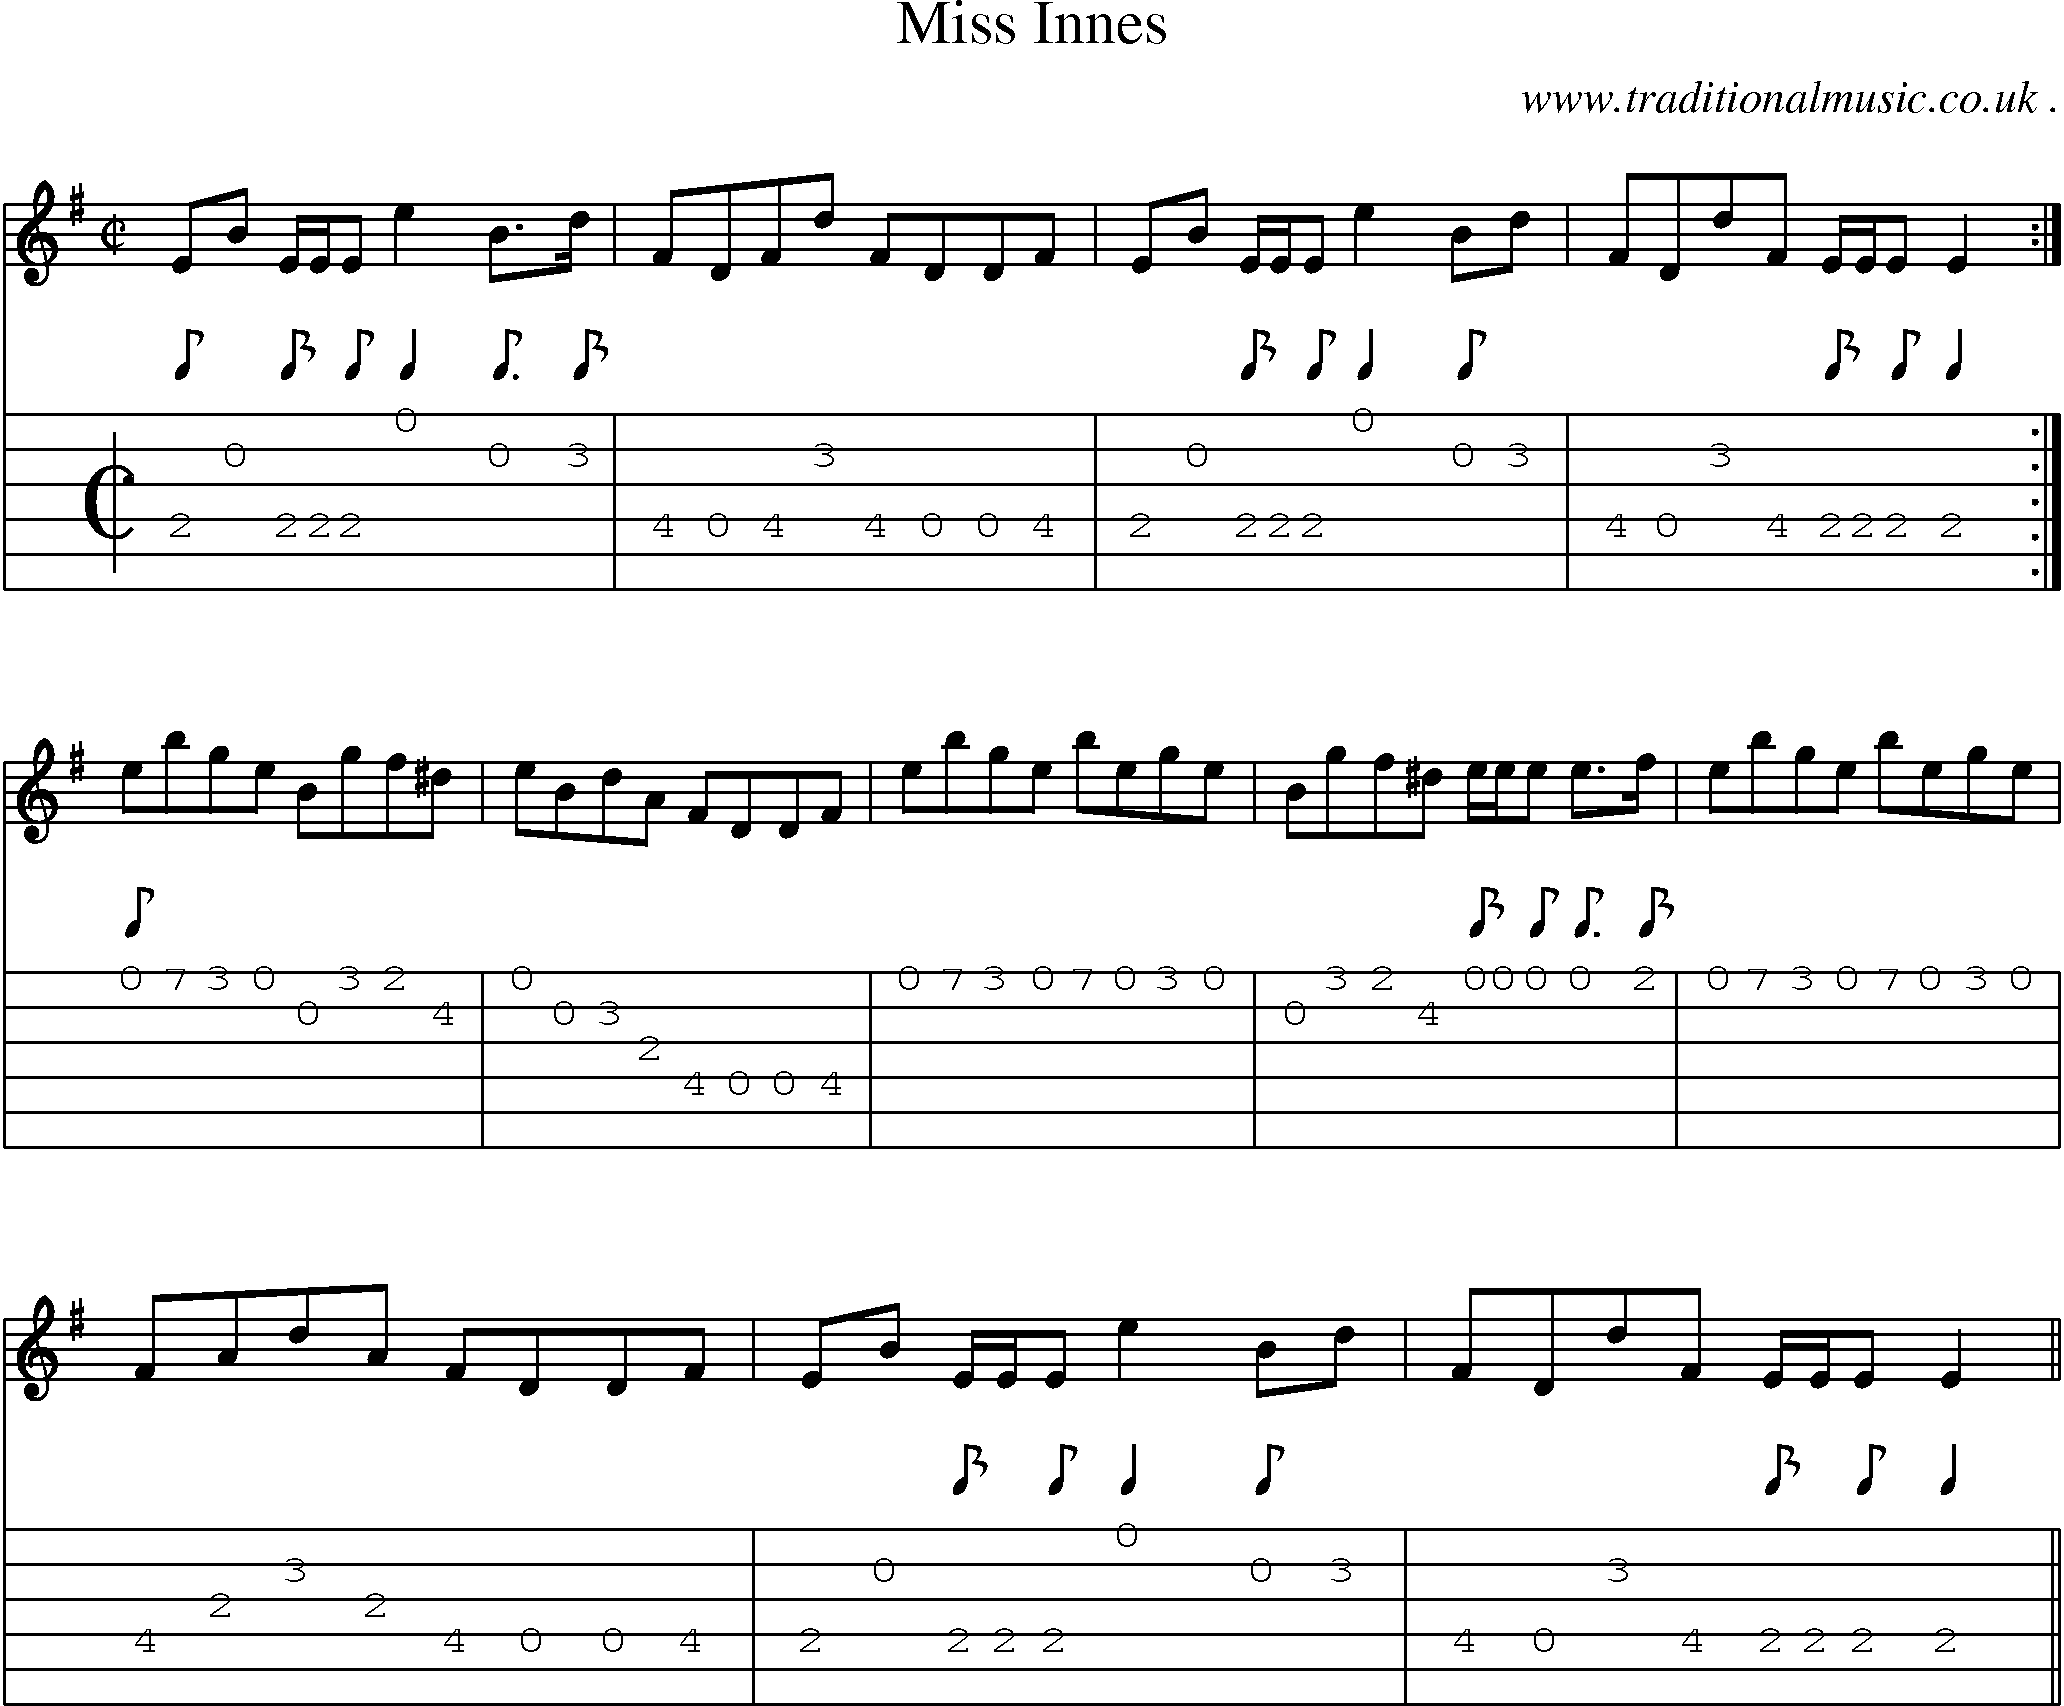 Sheet-music  score, Chords and Guitar Tabs for Miss Innes